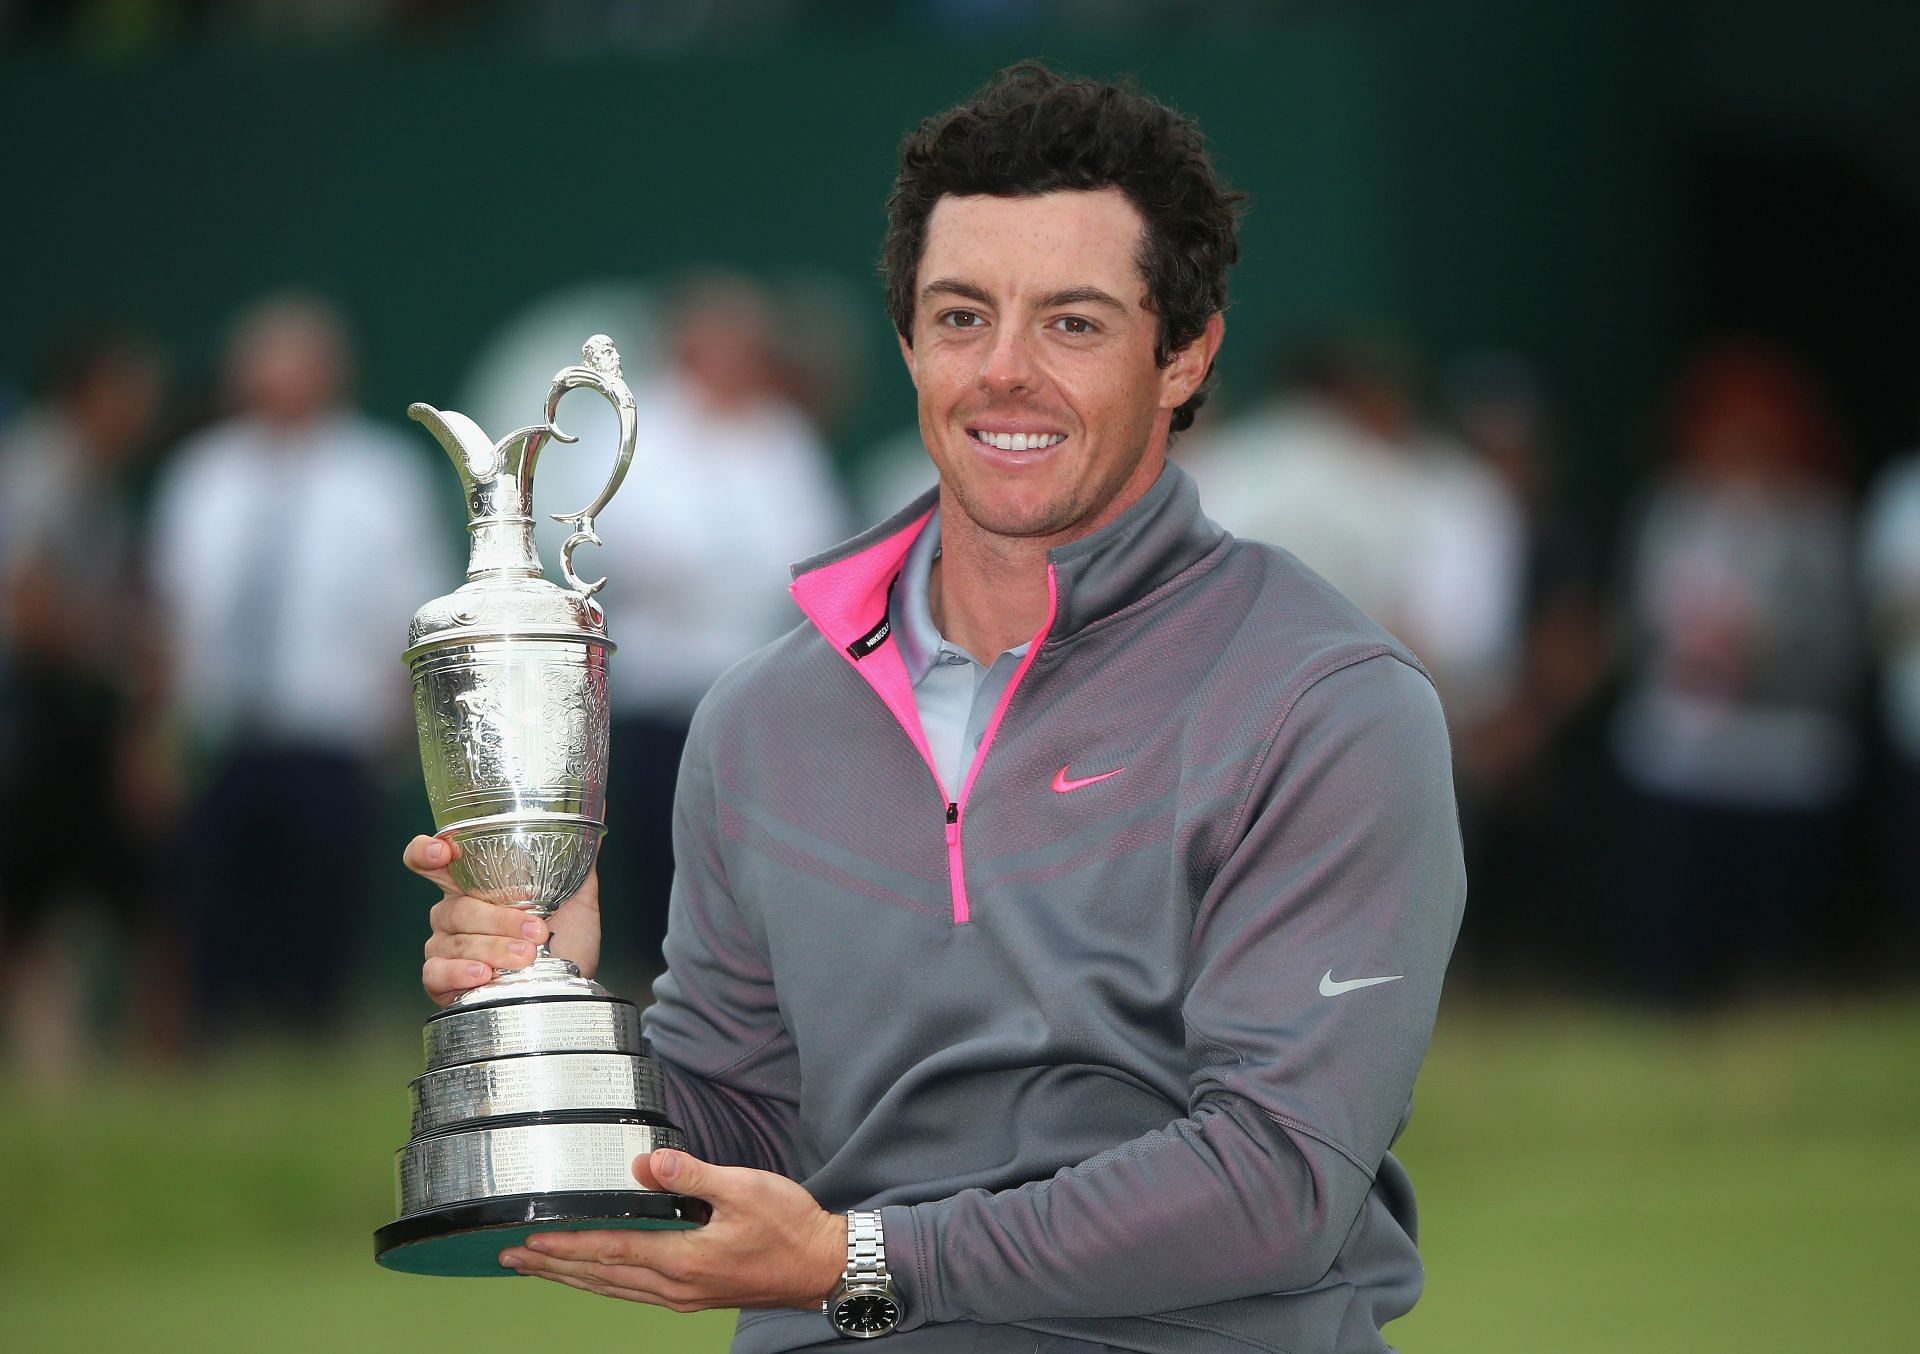 Rory McIlroy won the 143rd Open in 2014